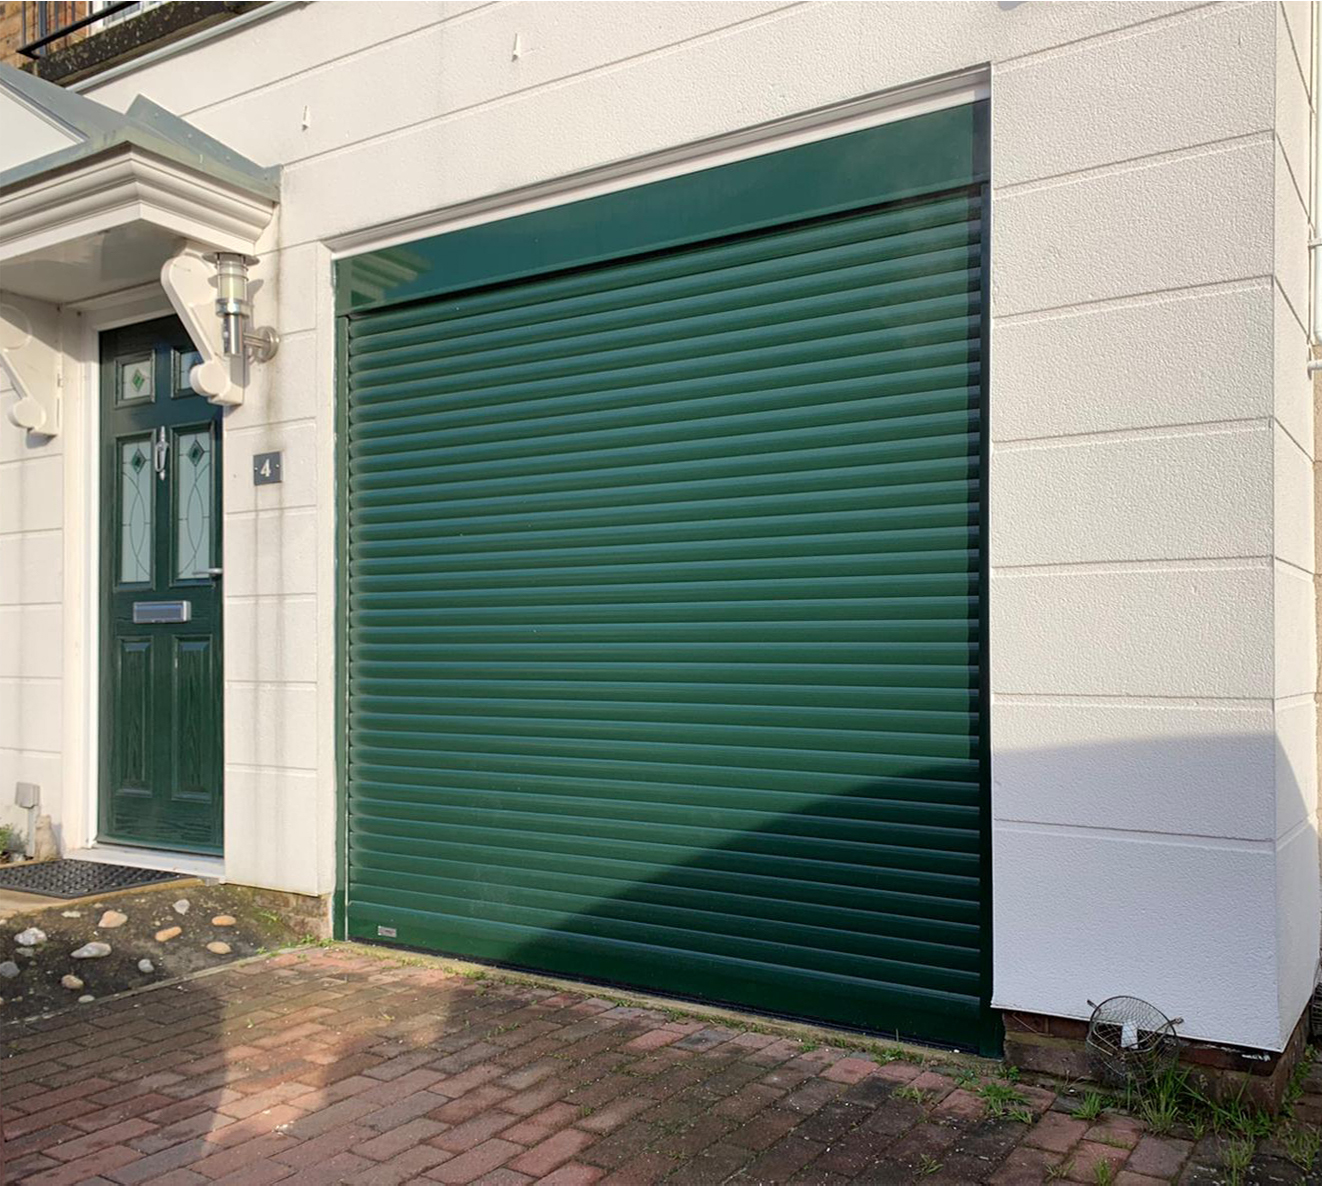 SeceuroGlide Fully Automated Compact Insulated Roller Garage Door finished In Fir Green